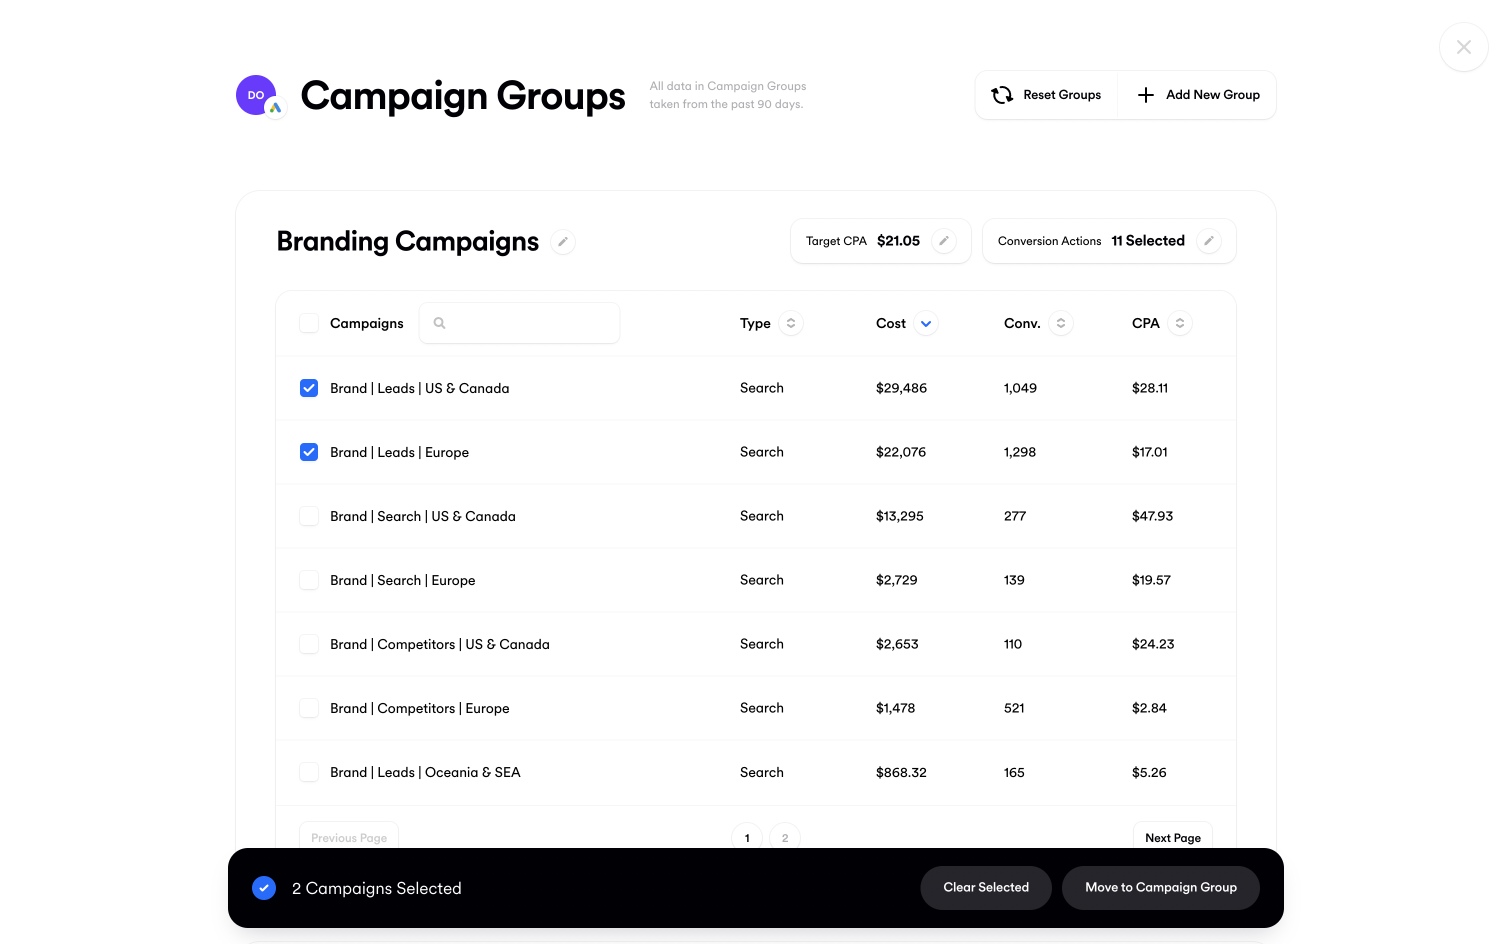 Screenshot of Campaigns being selected in Campaign Groups